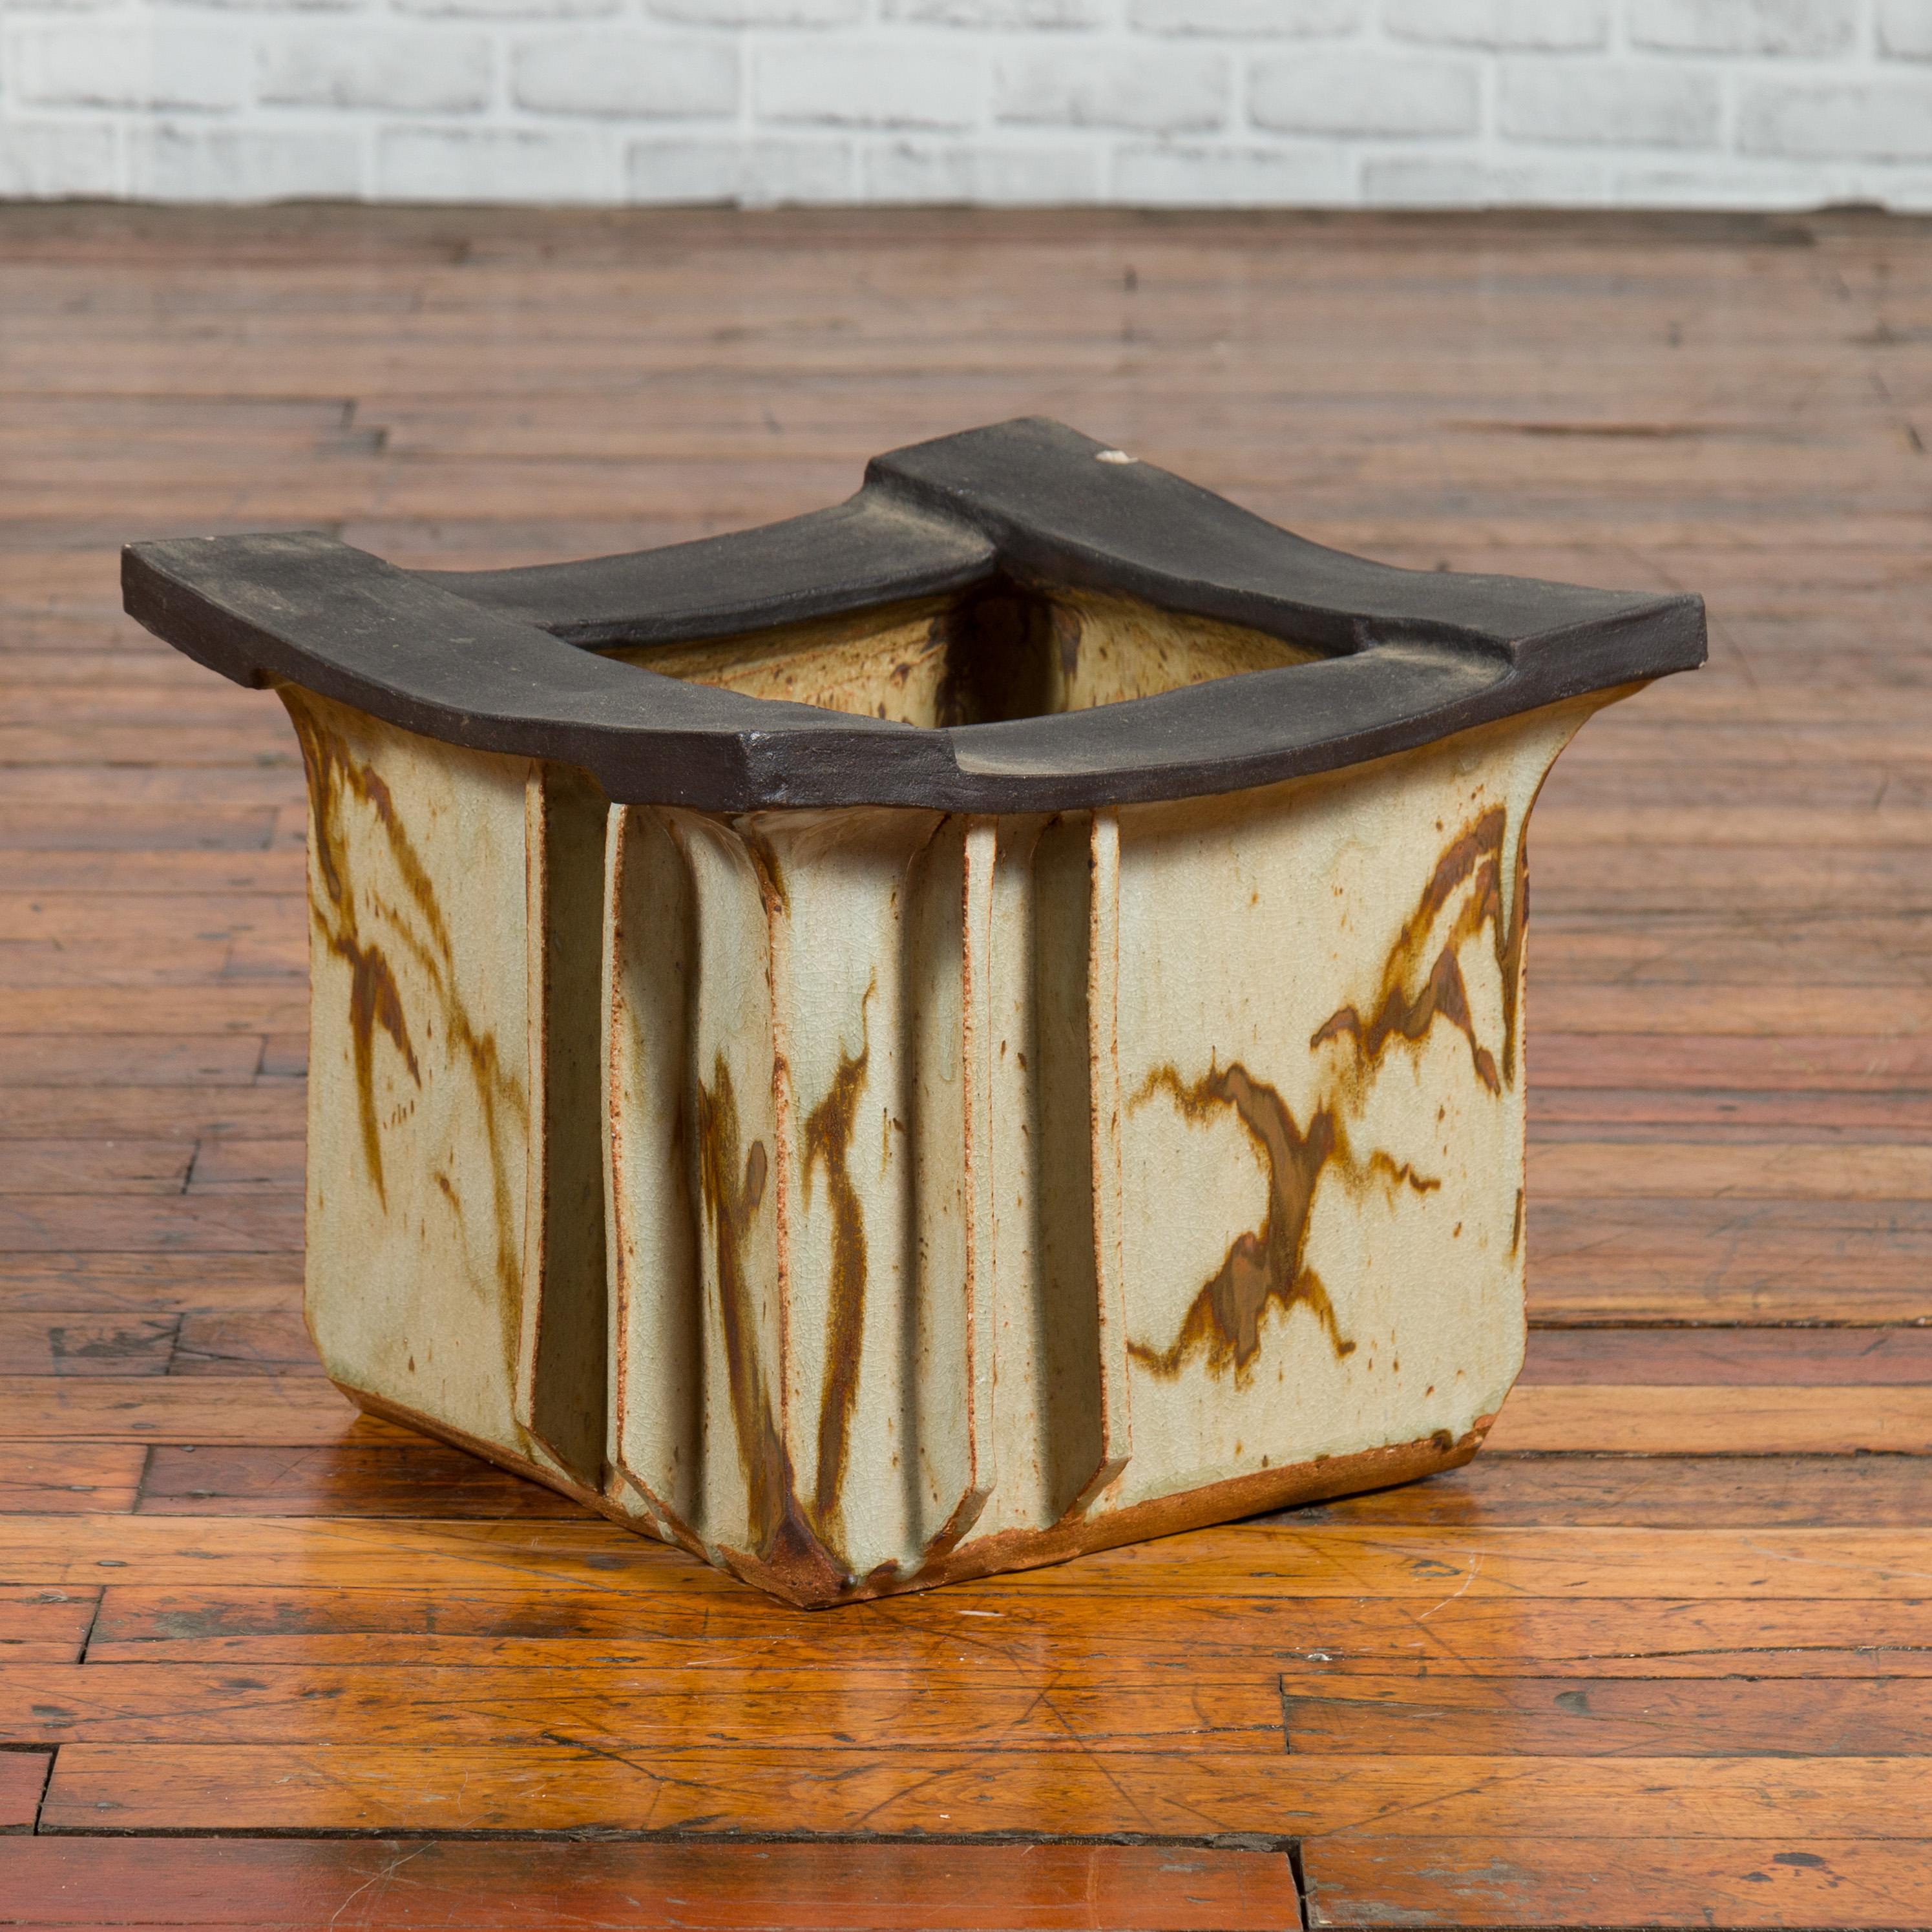 A Japanese Taisho period hibachi from the early 20th century, with glazed motifs and black edges. Created in Japan during the first quarter of the 20th century, this hibachi will make for a great planter of jardinière. Showcasing contrasting colors